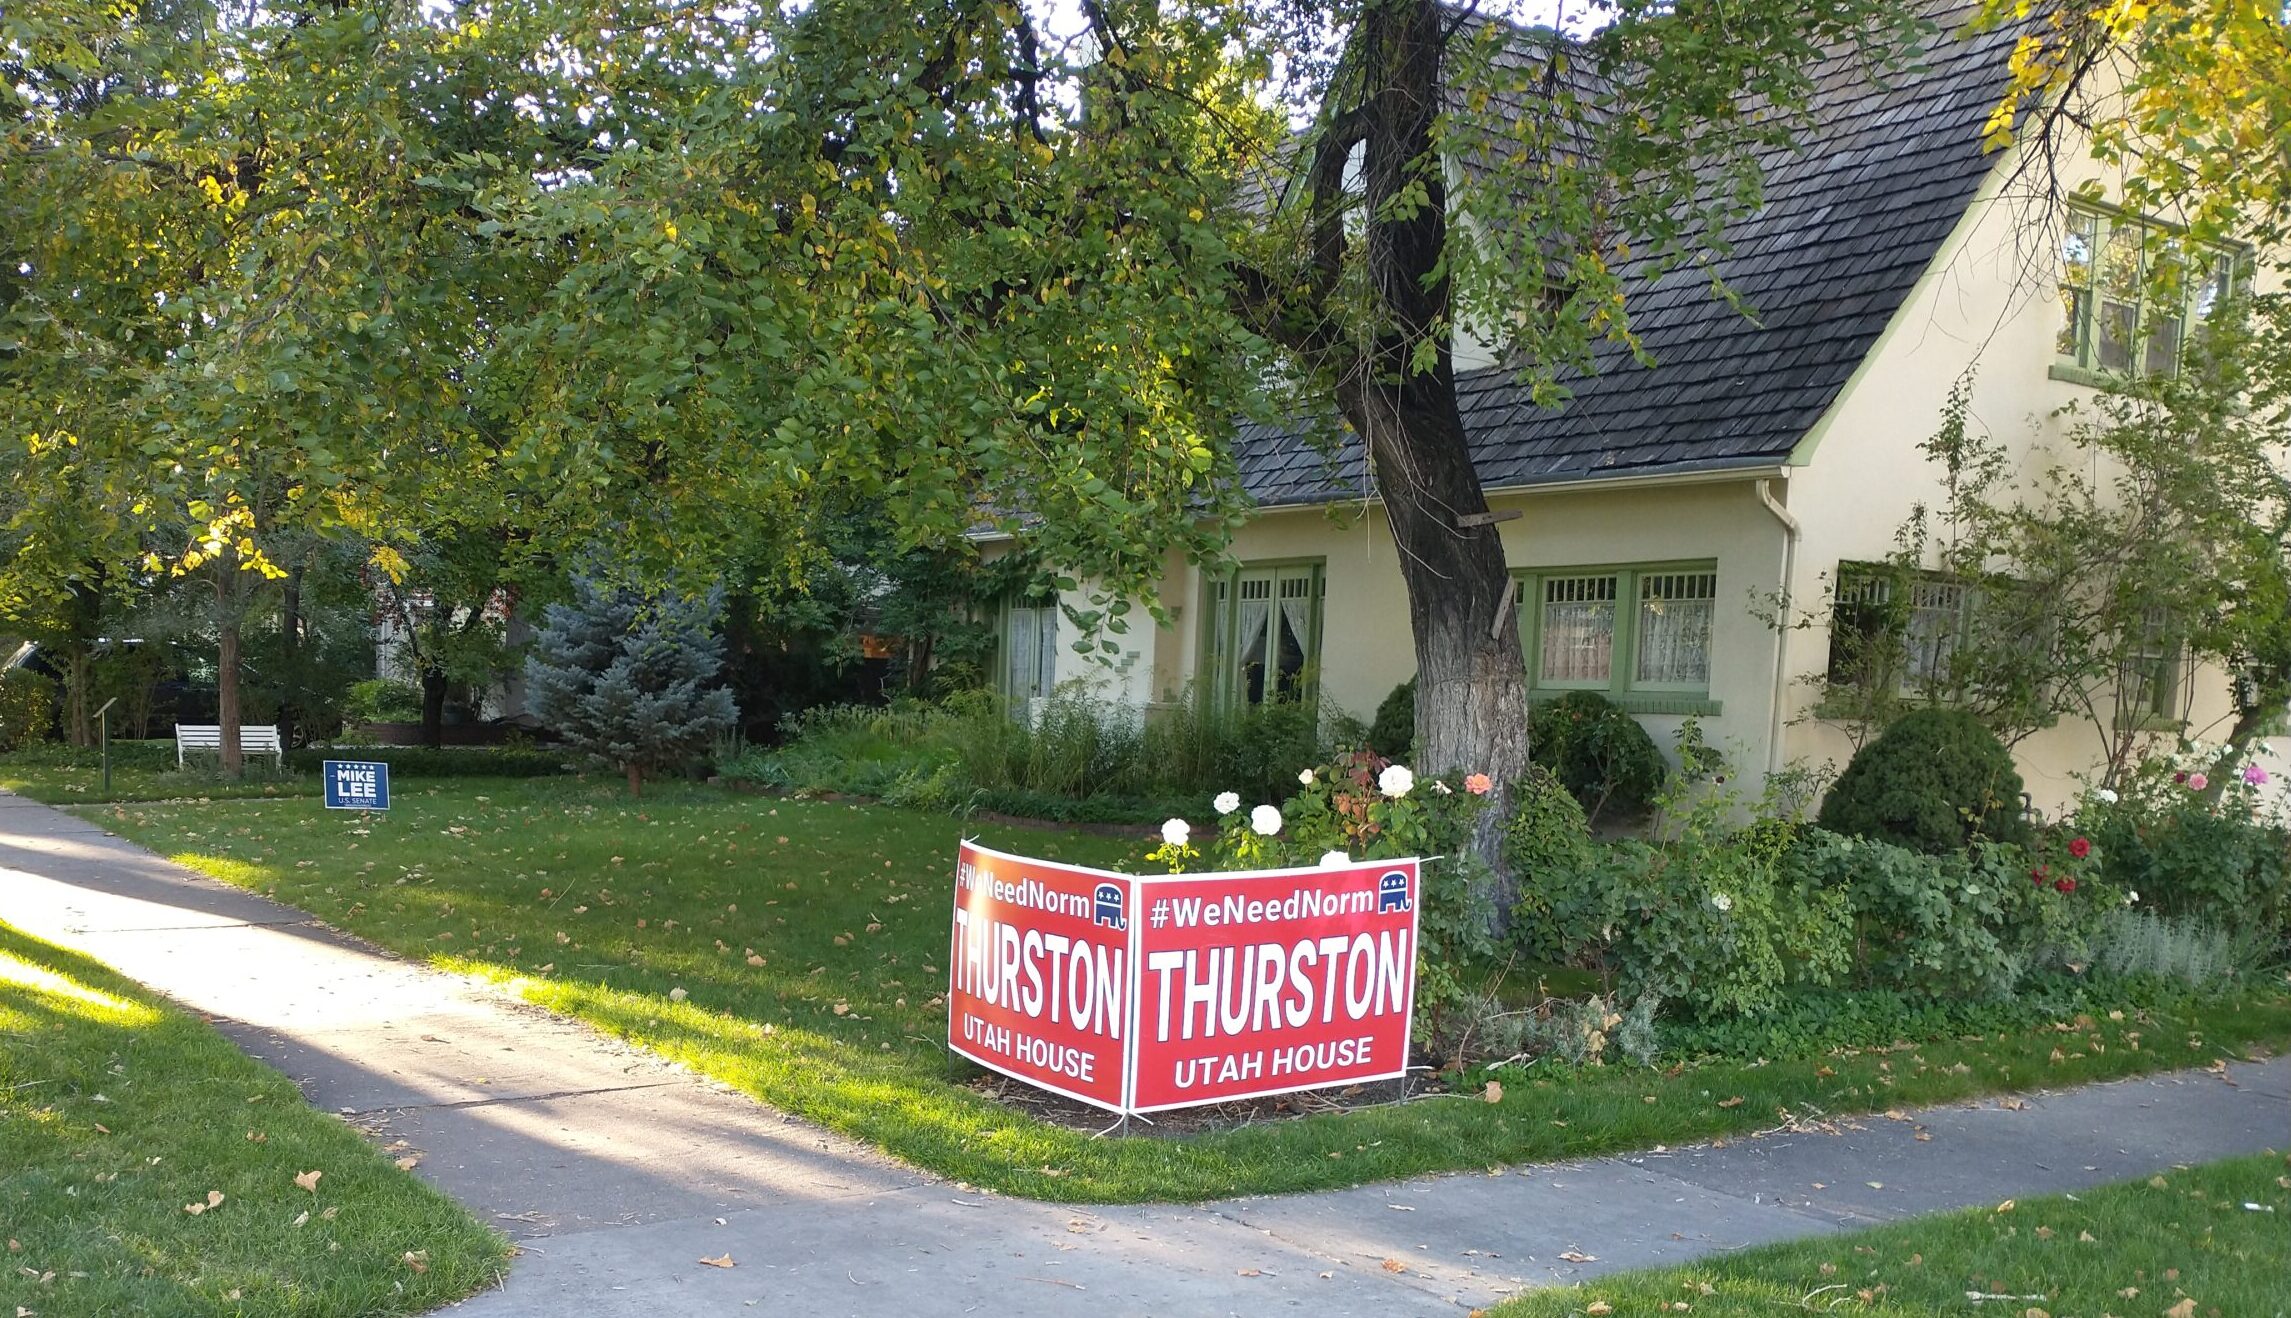 Campaign signs in front of a house